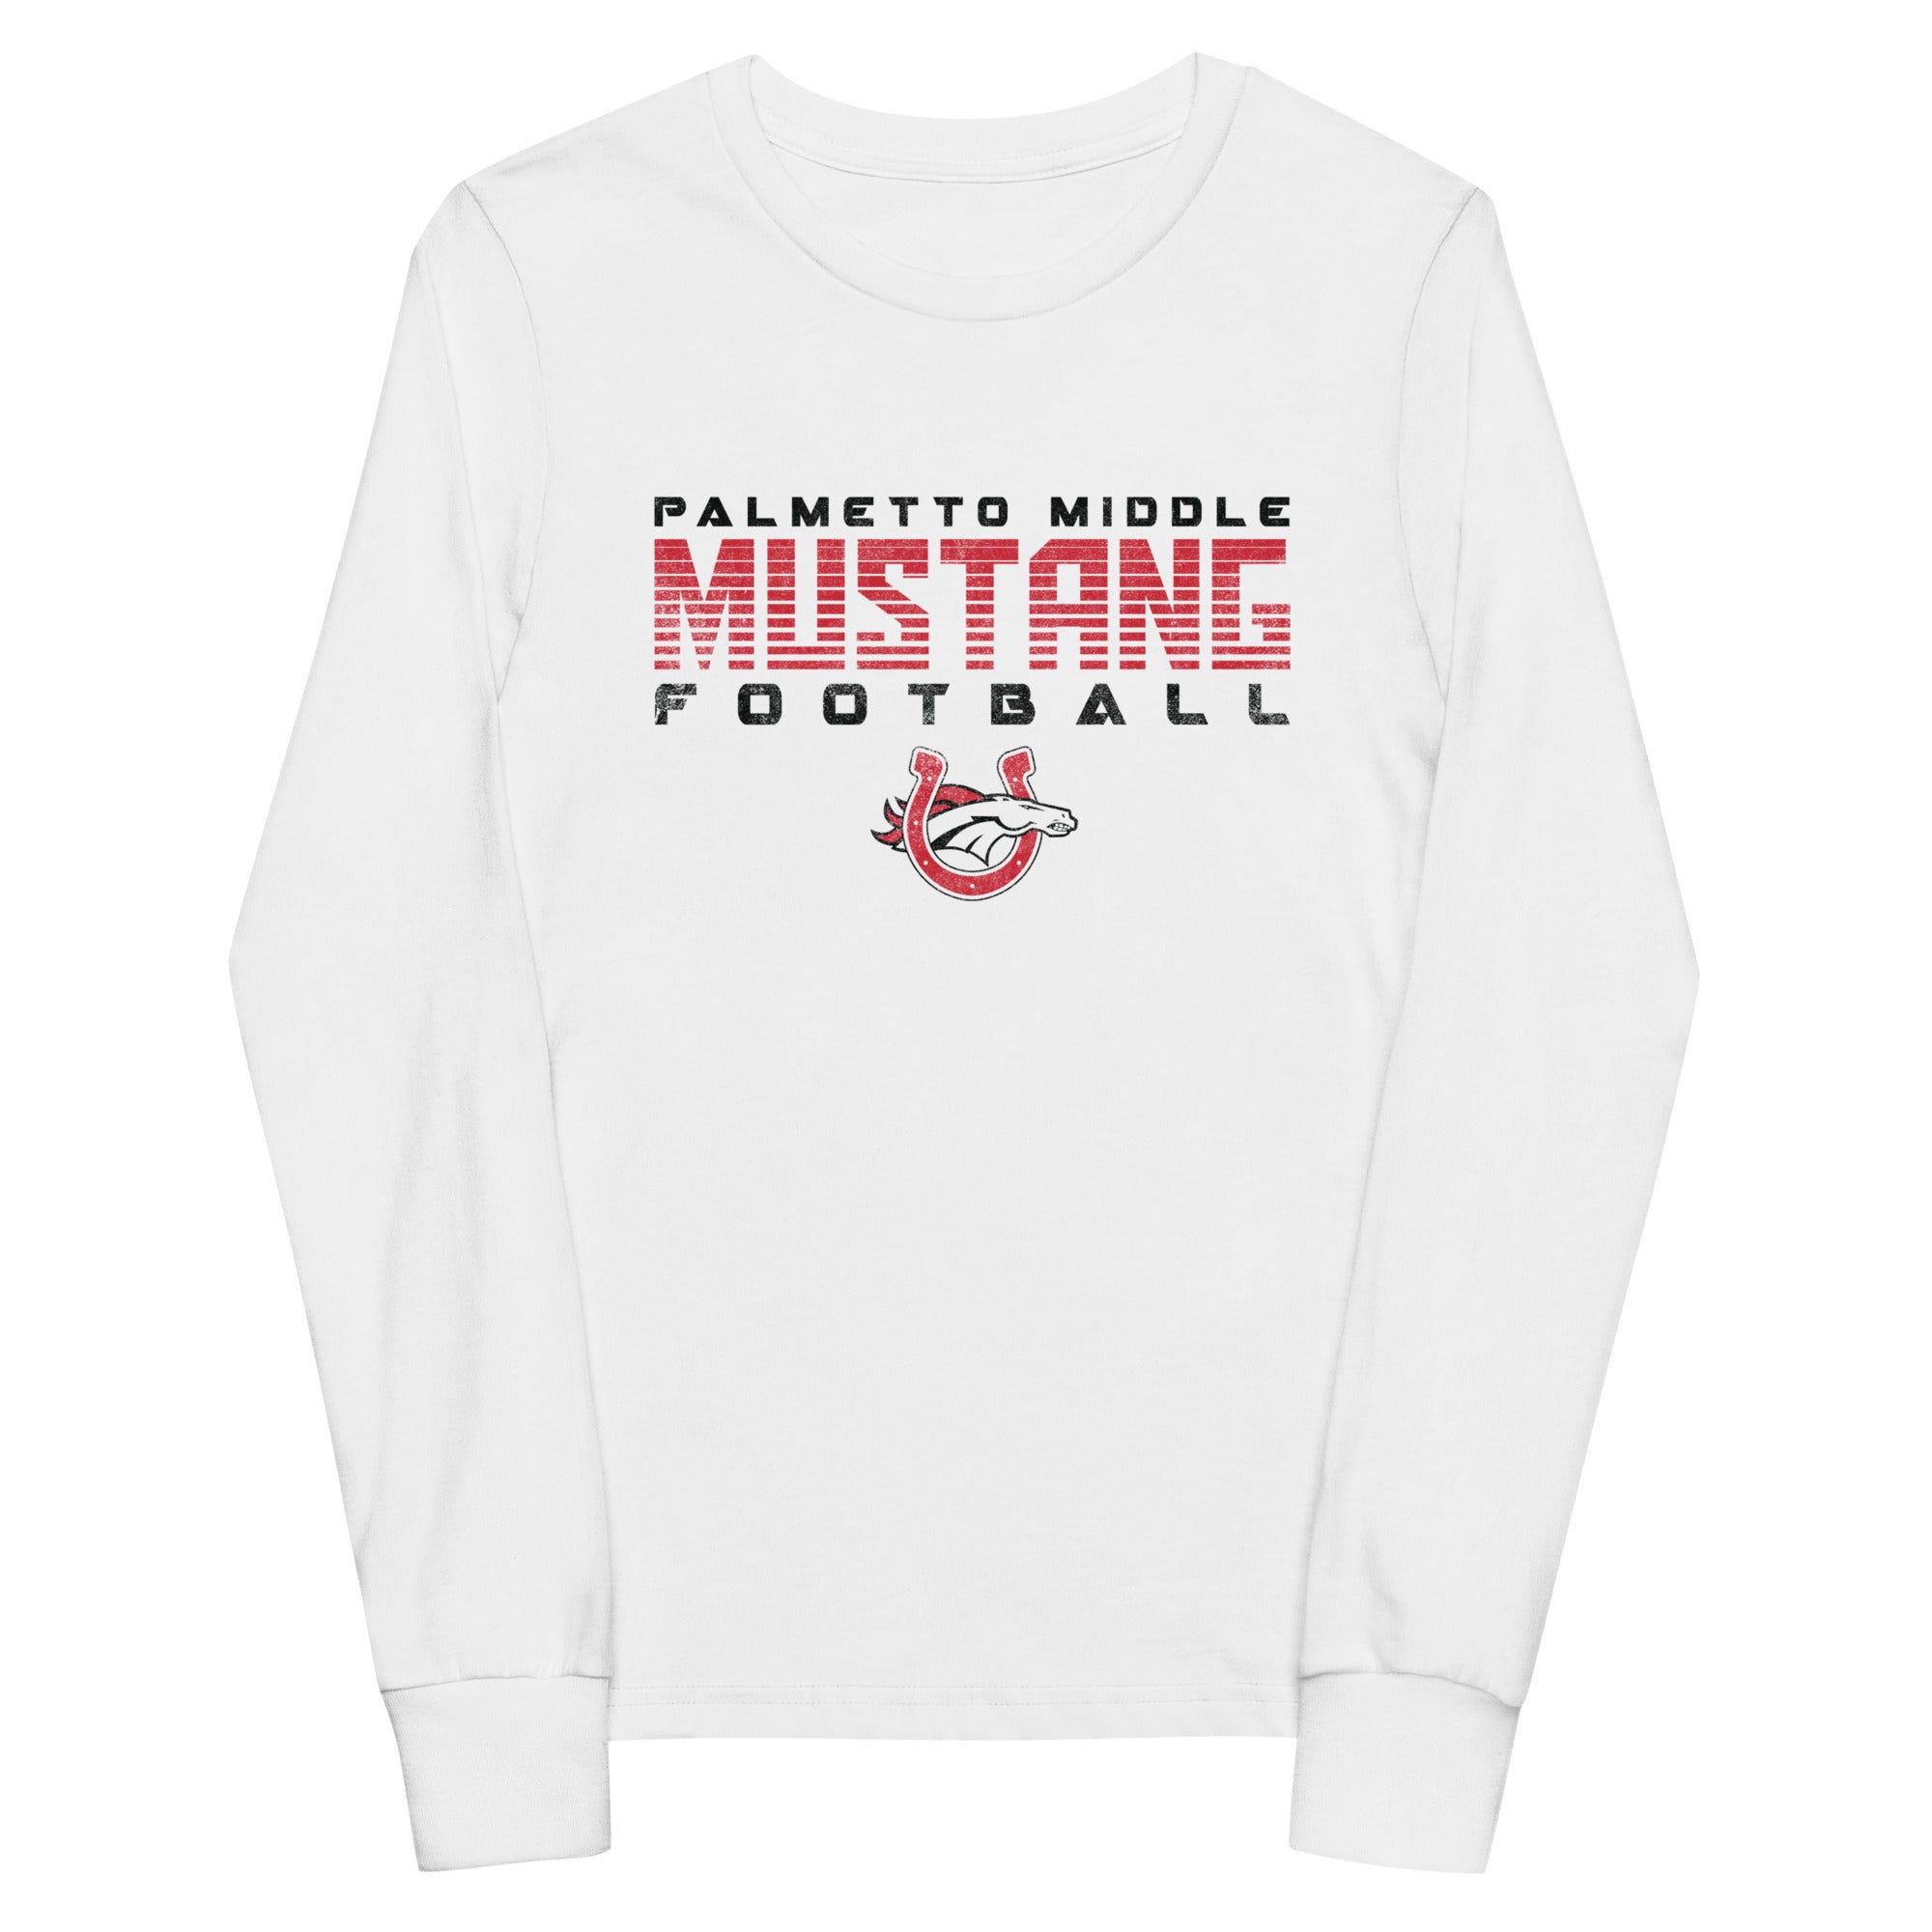 Palmetto Middle Football White Youth Long Sleeve Tee